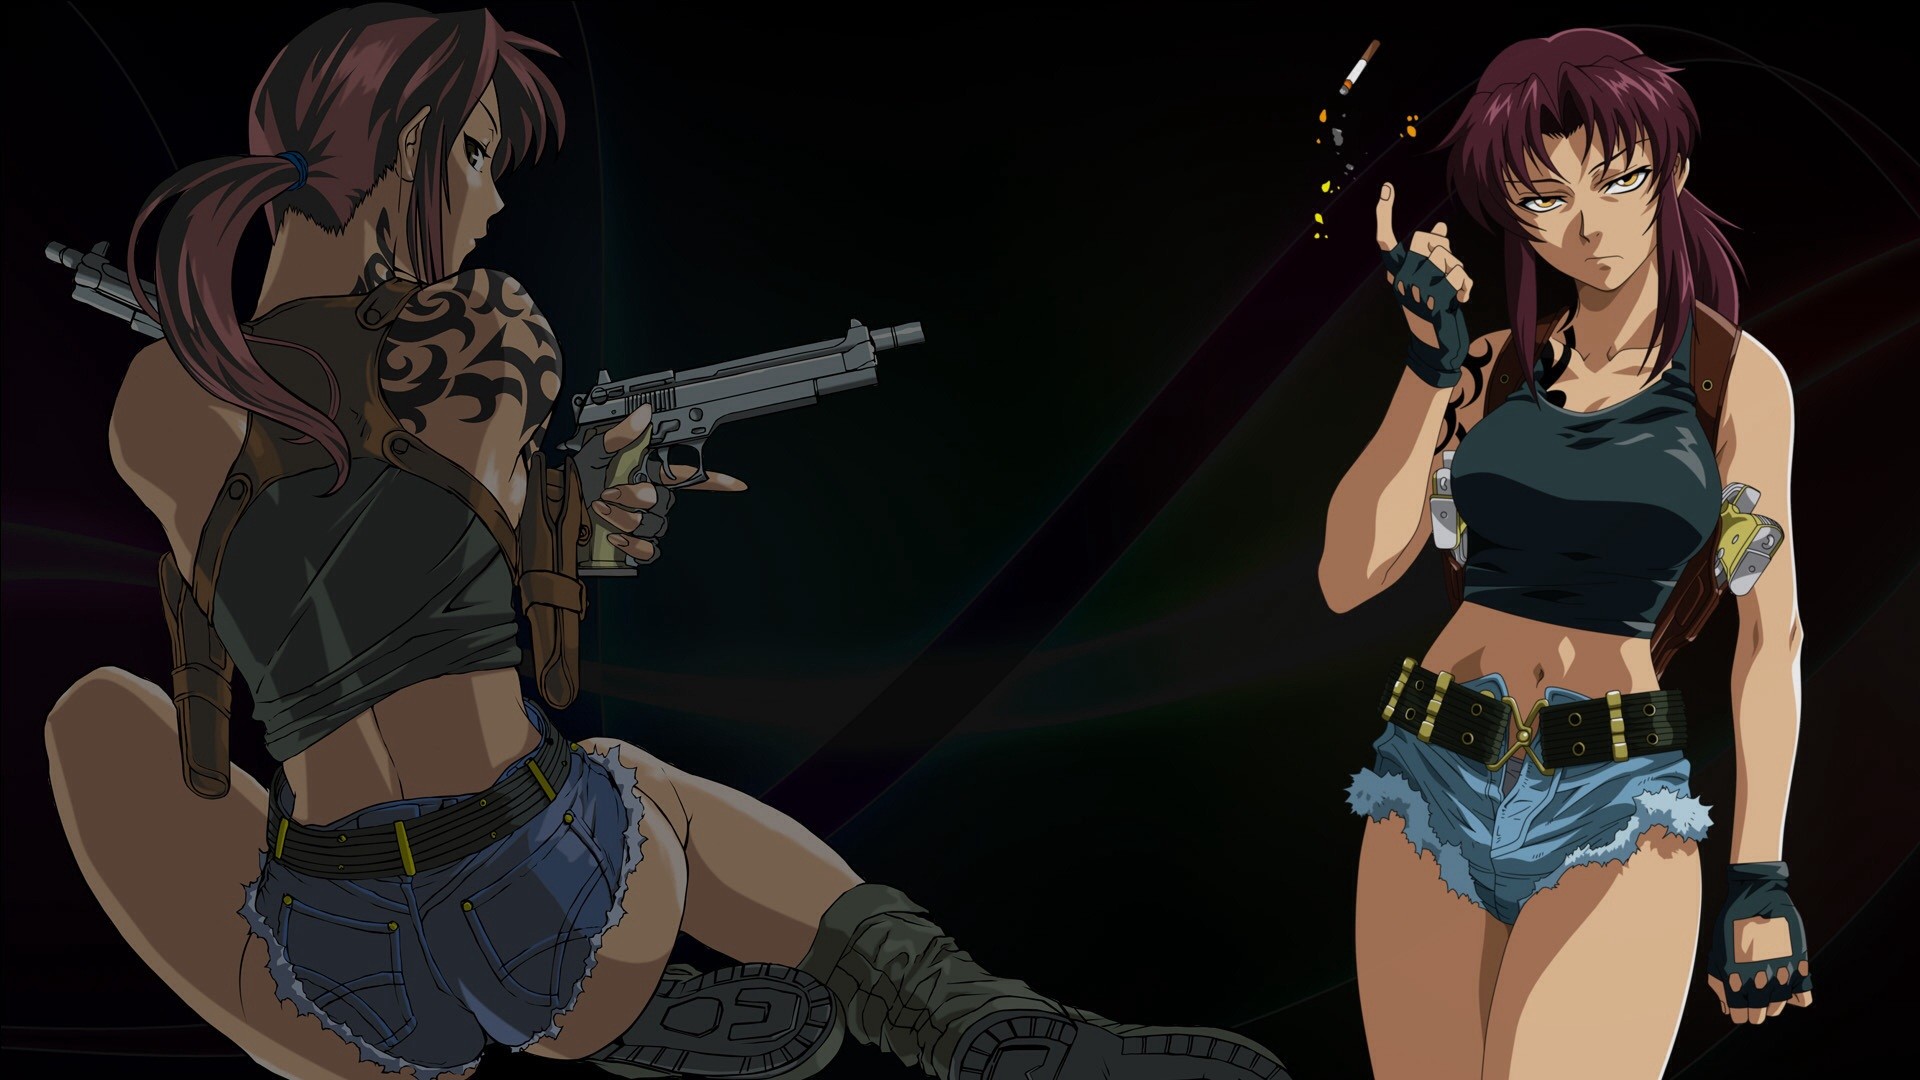 1920x1080 Black Lagoon images black lagoon. HD wallpaper and background photos